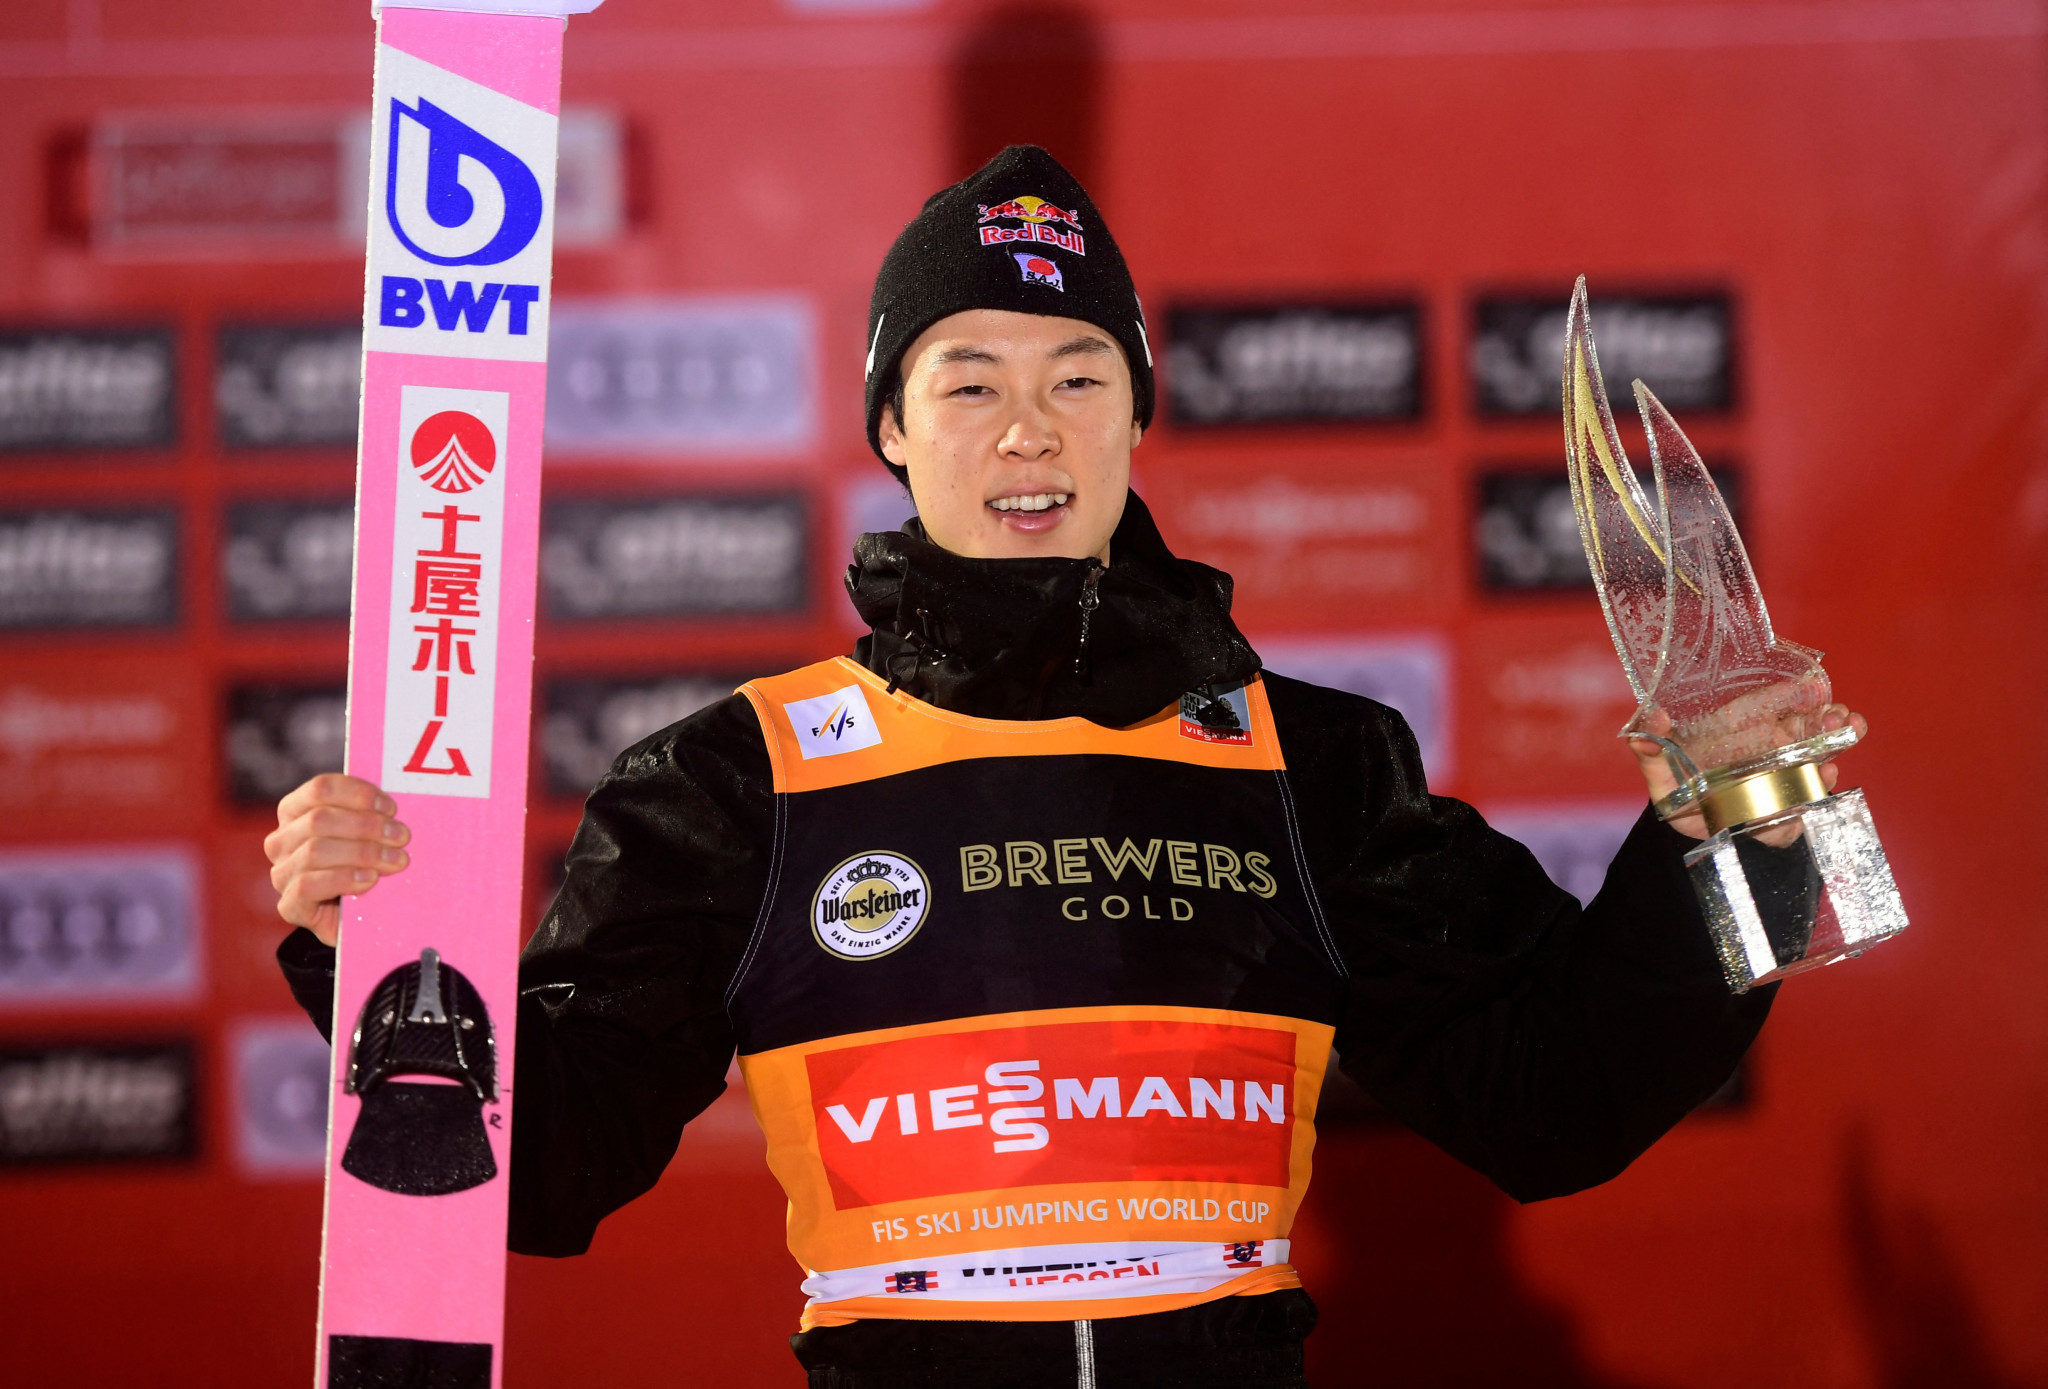 Japan's Ryōyū Kobayashi won the first of the men's Ski Jumping World Cups in Willingen, with former leader Karl Geiger of Germany enduring a disappointing day ©Getty Images